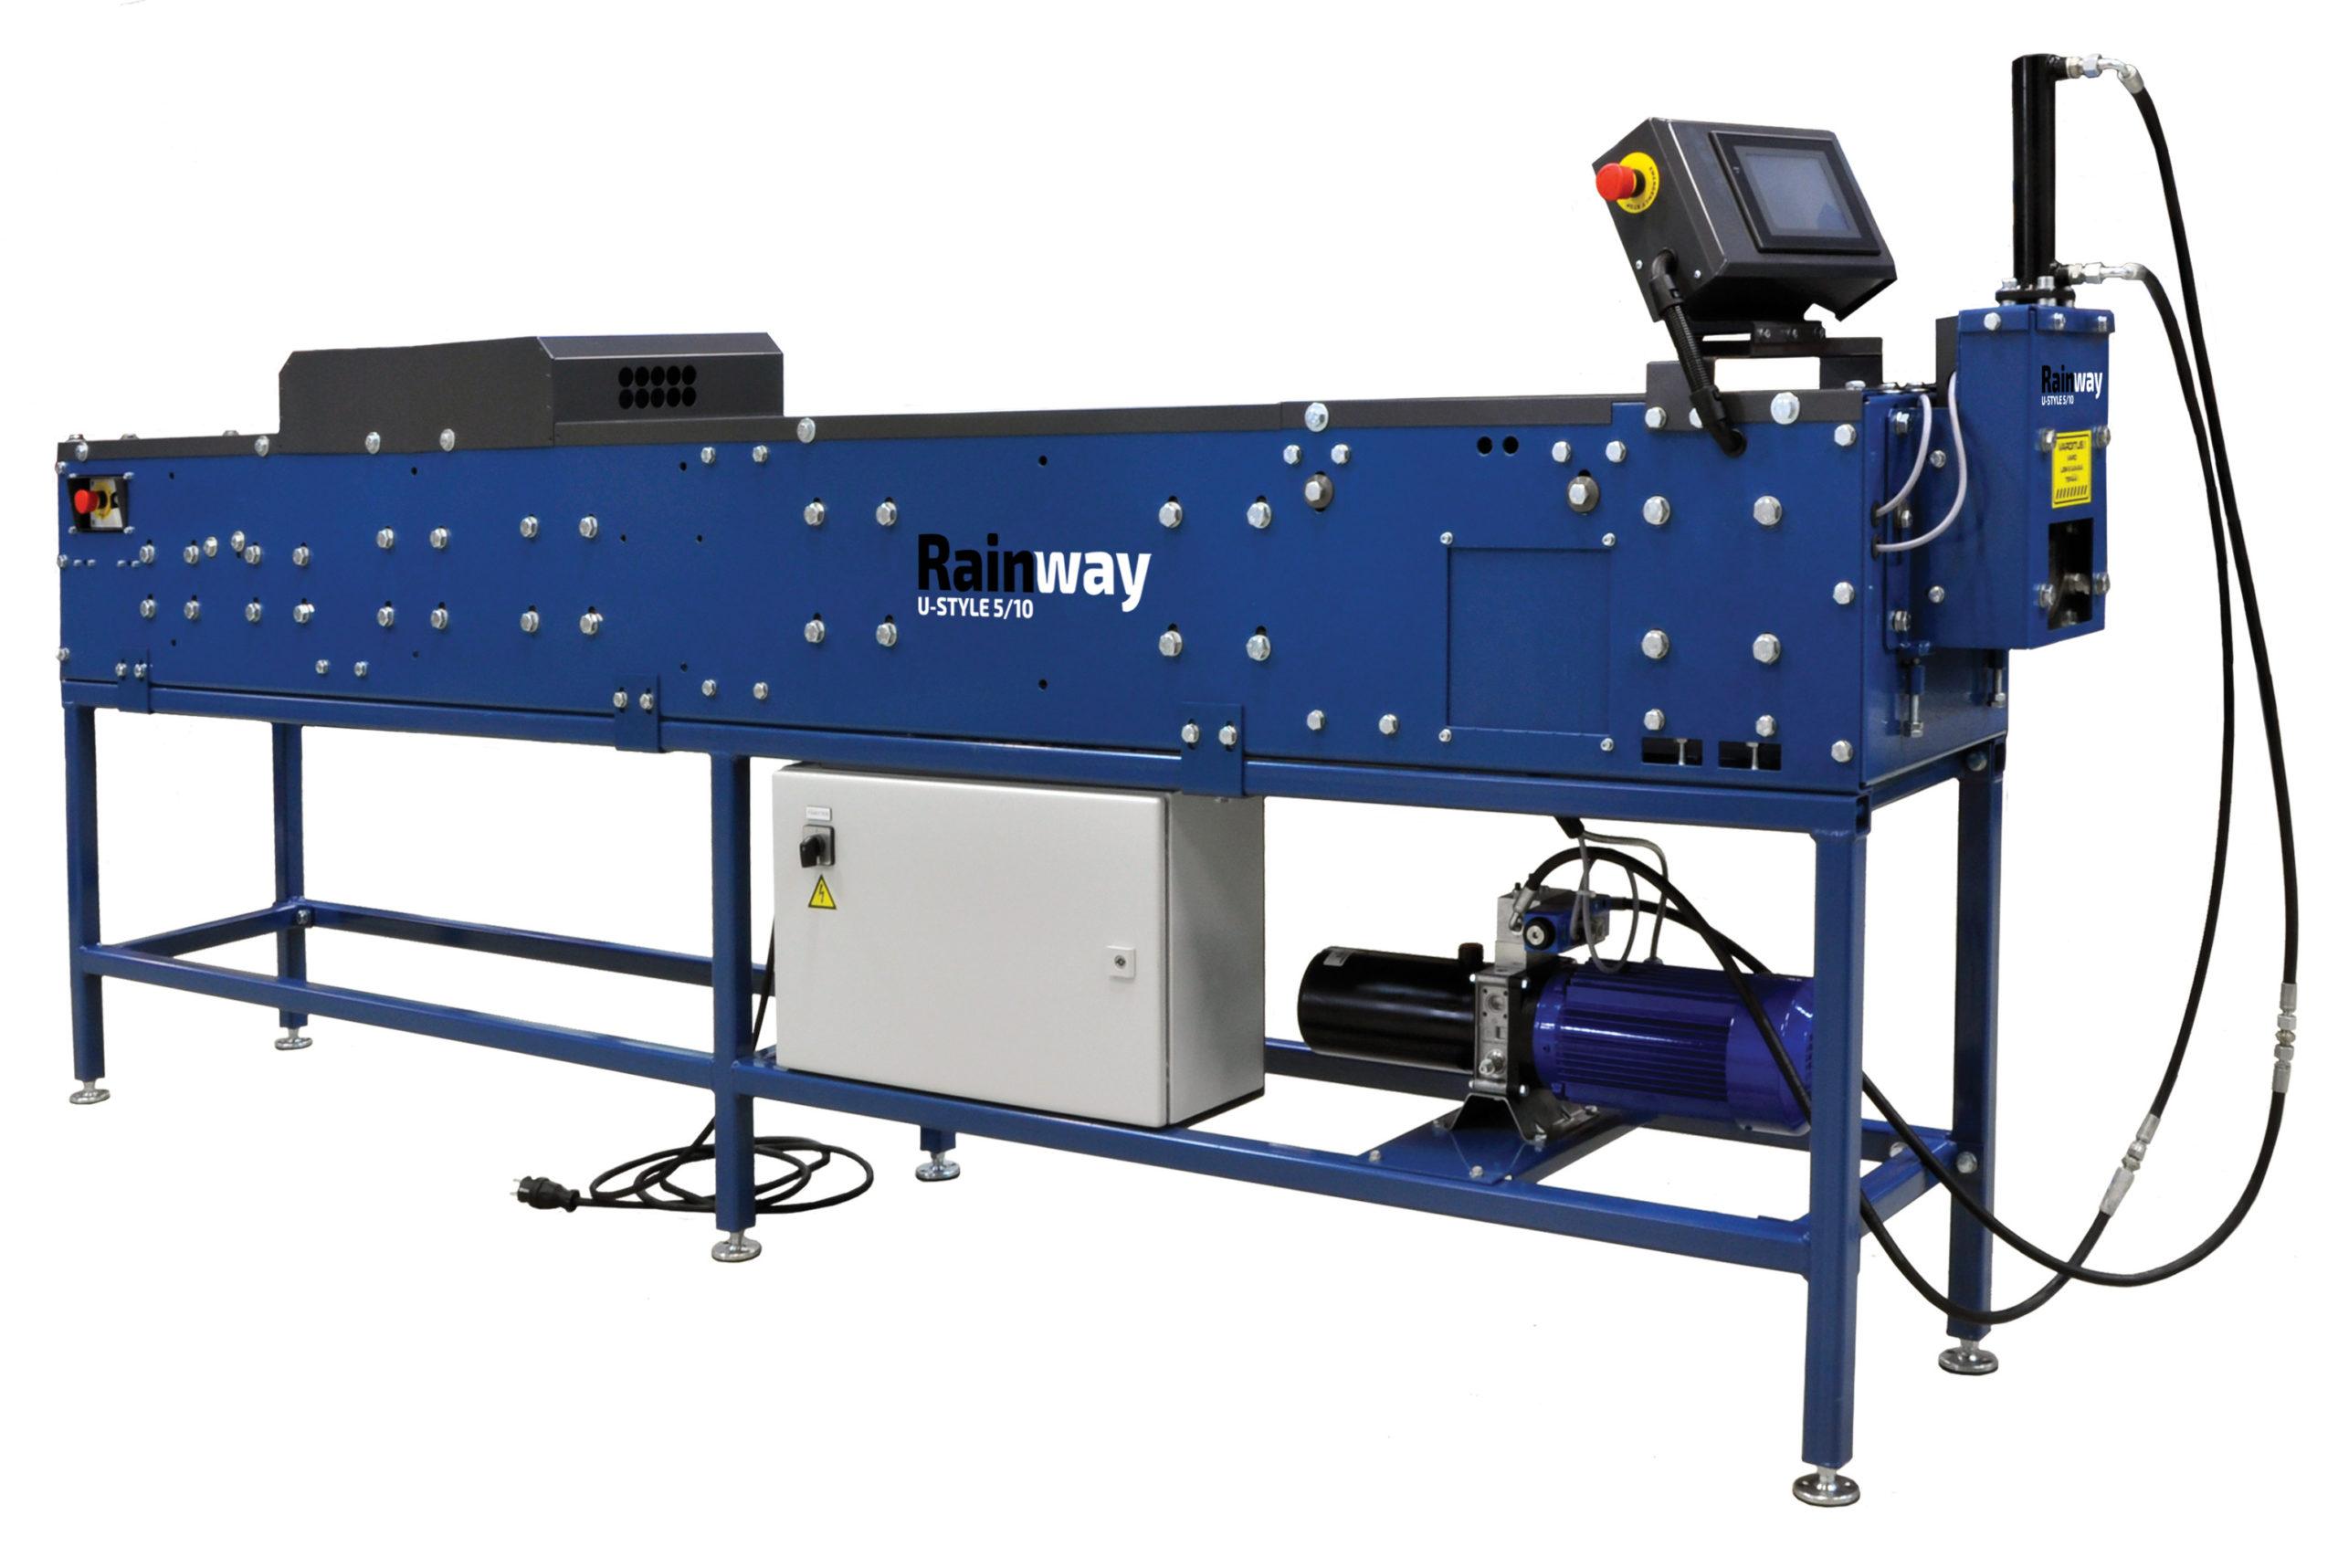 The most popular gutter machine on the market for the production of half round gutters also with factory settings.